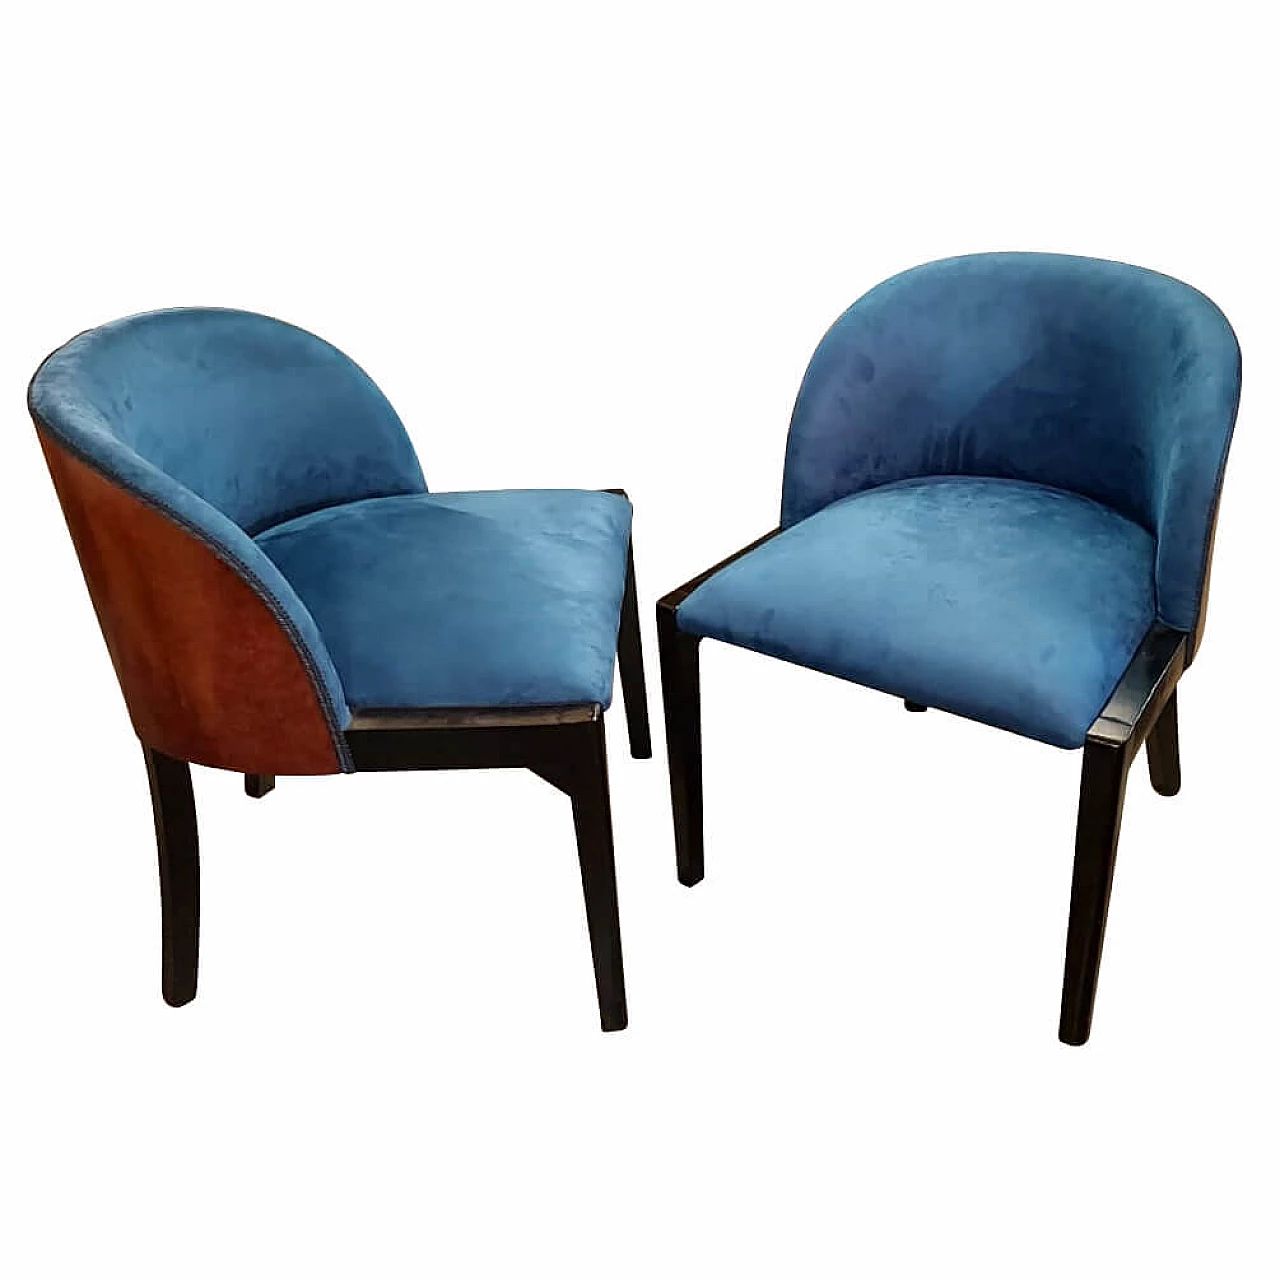 Pair of cockpit armchairs, 1940s 1145120